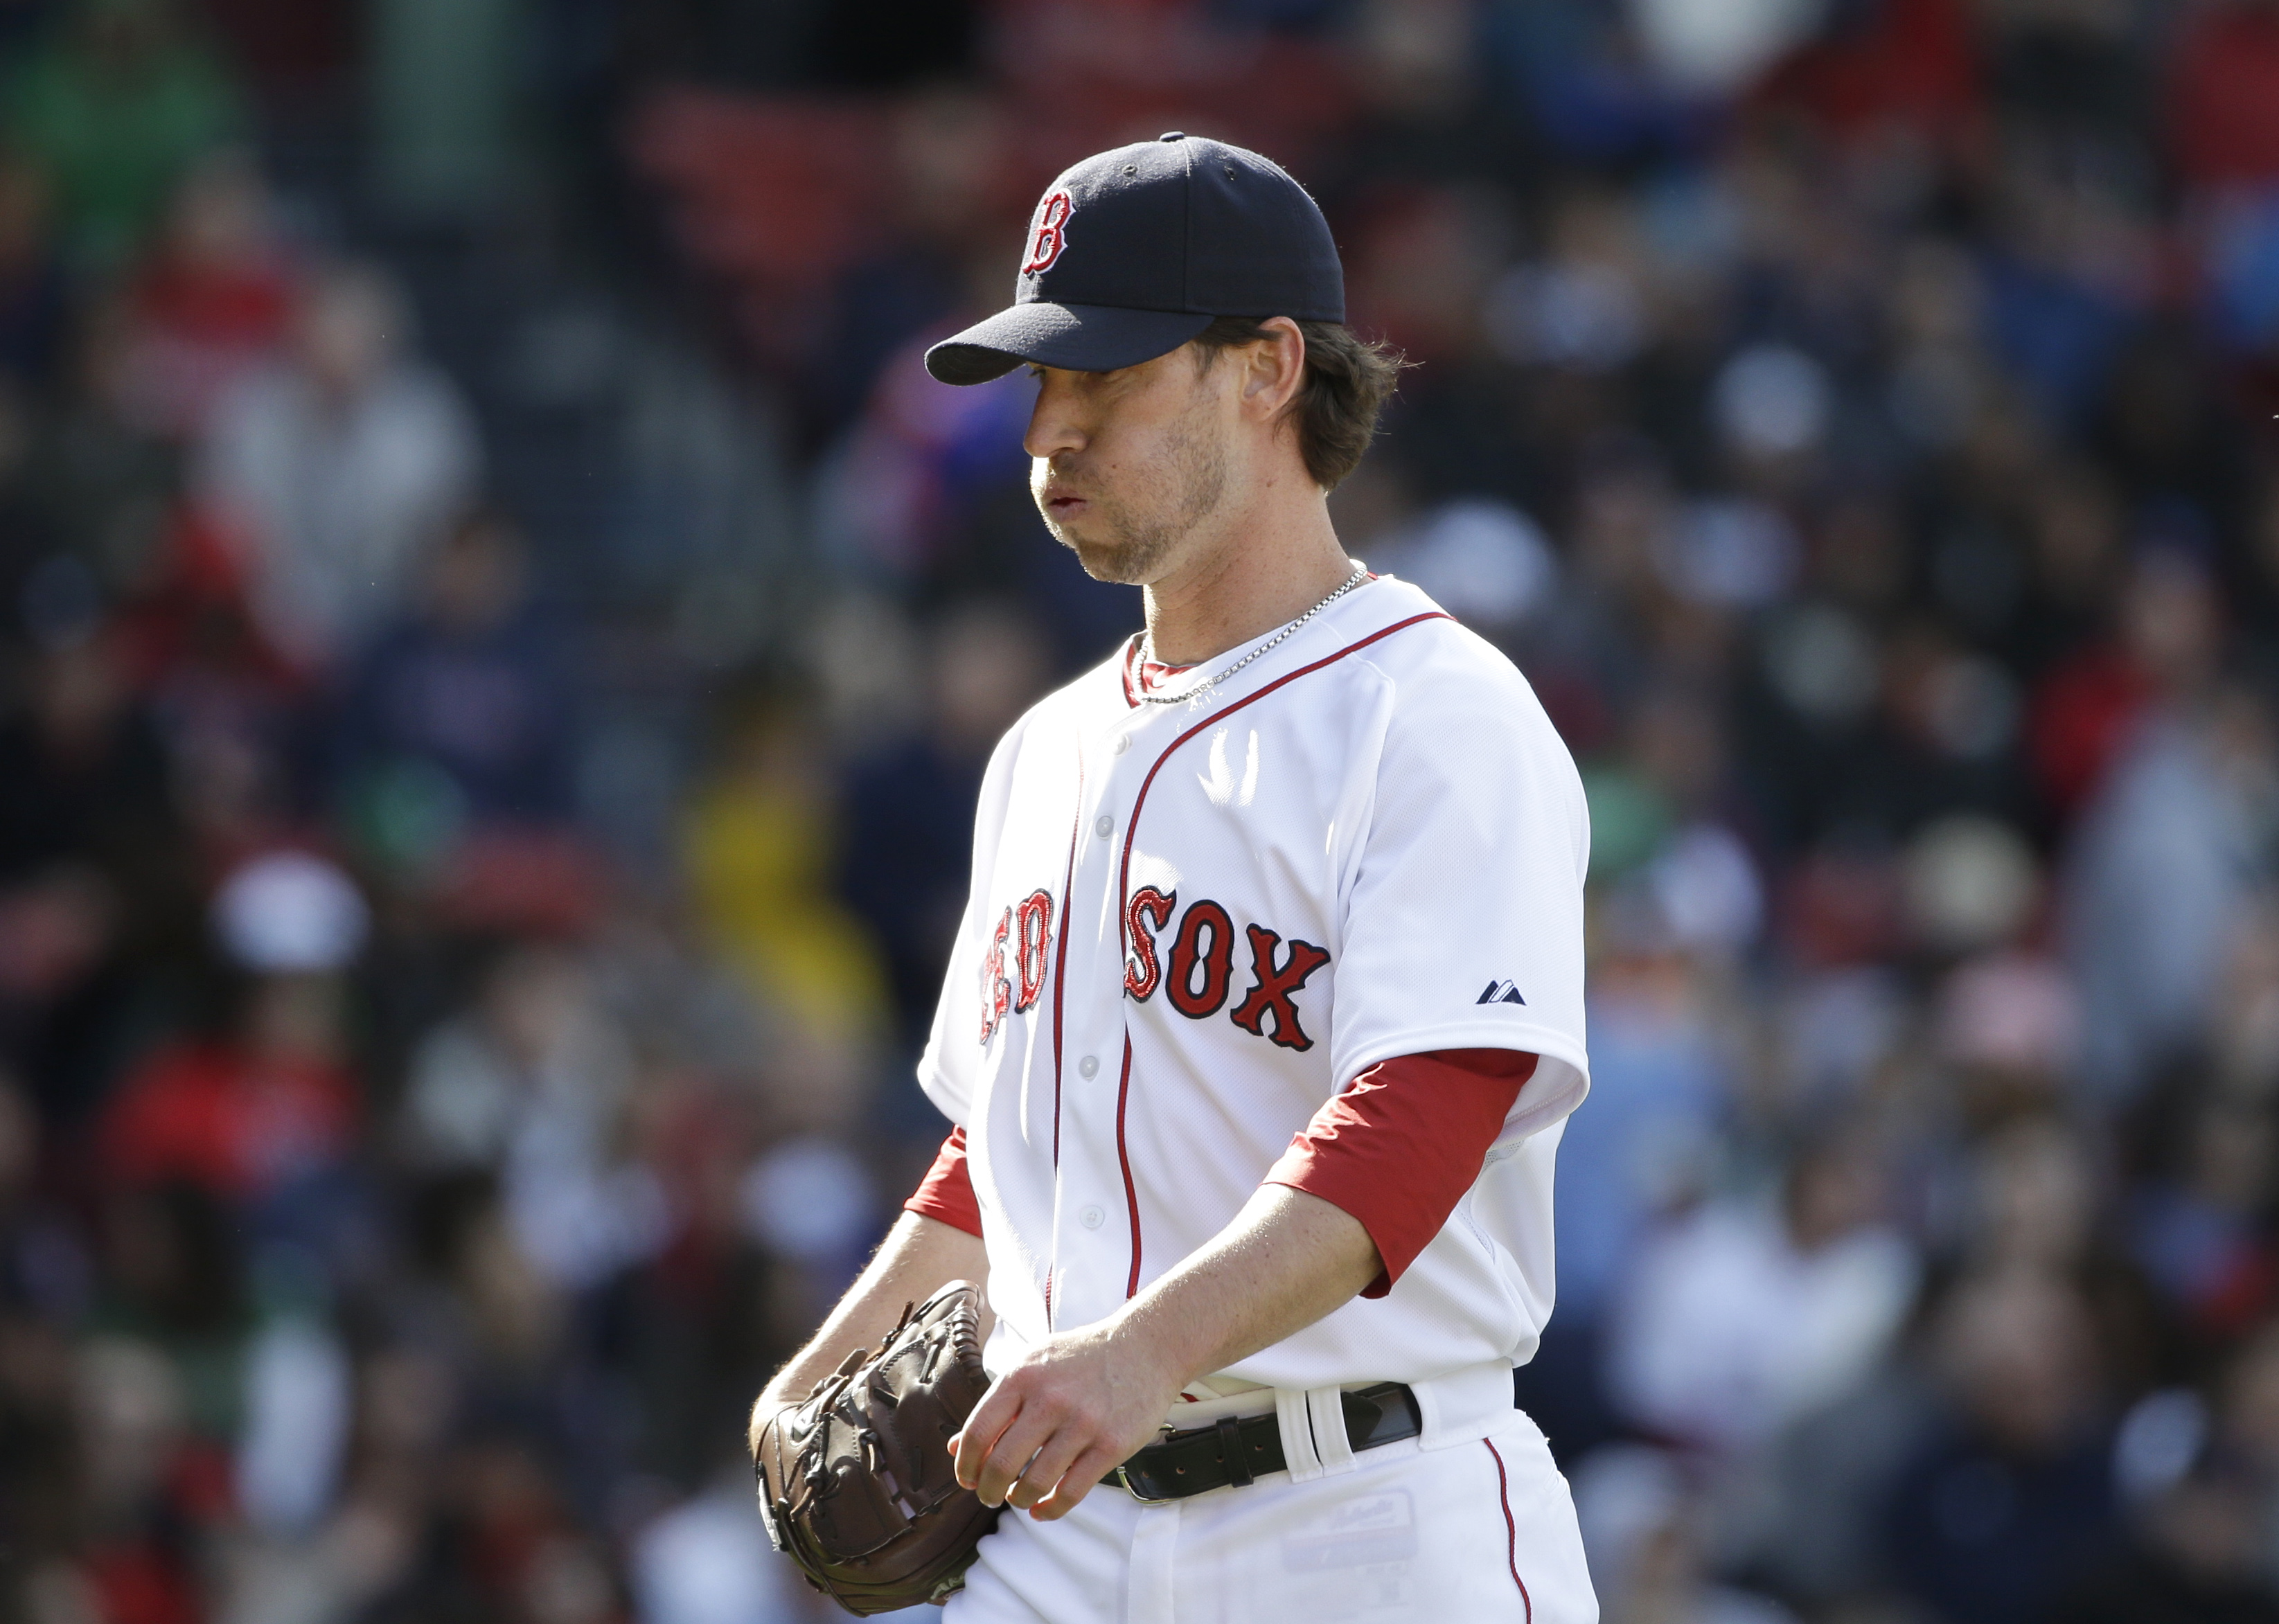 Report: Red Sox may hire Craig Breslow in pitching development